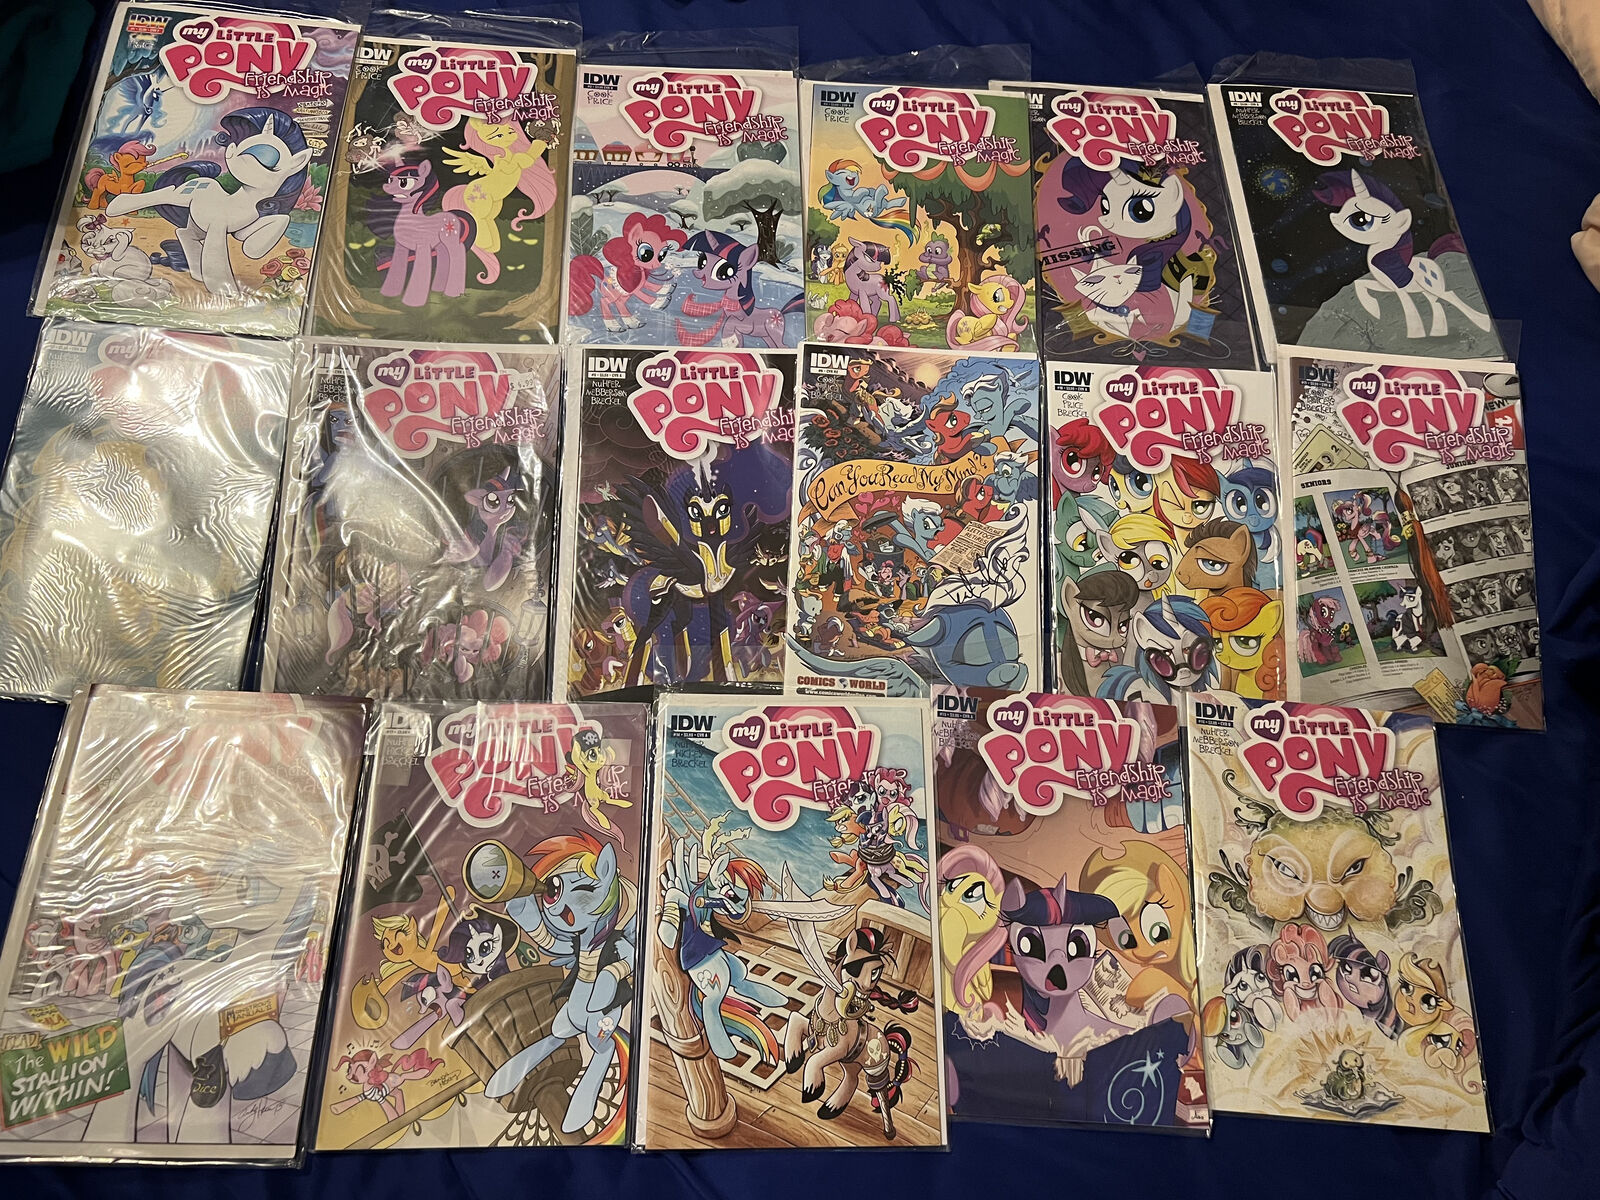 HUGE My Little Pony Friendship is Magic Comics LOT of 20 #1-16 + SIGNED + More